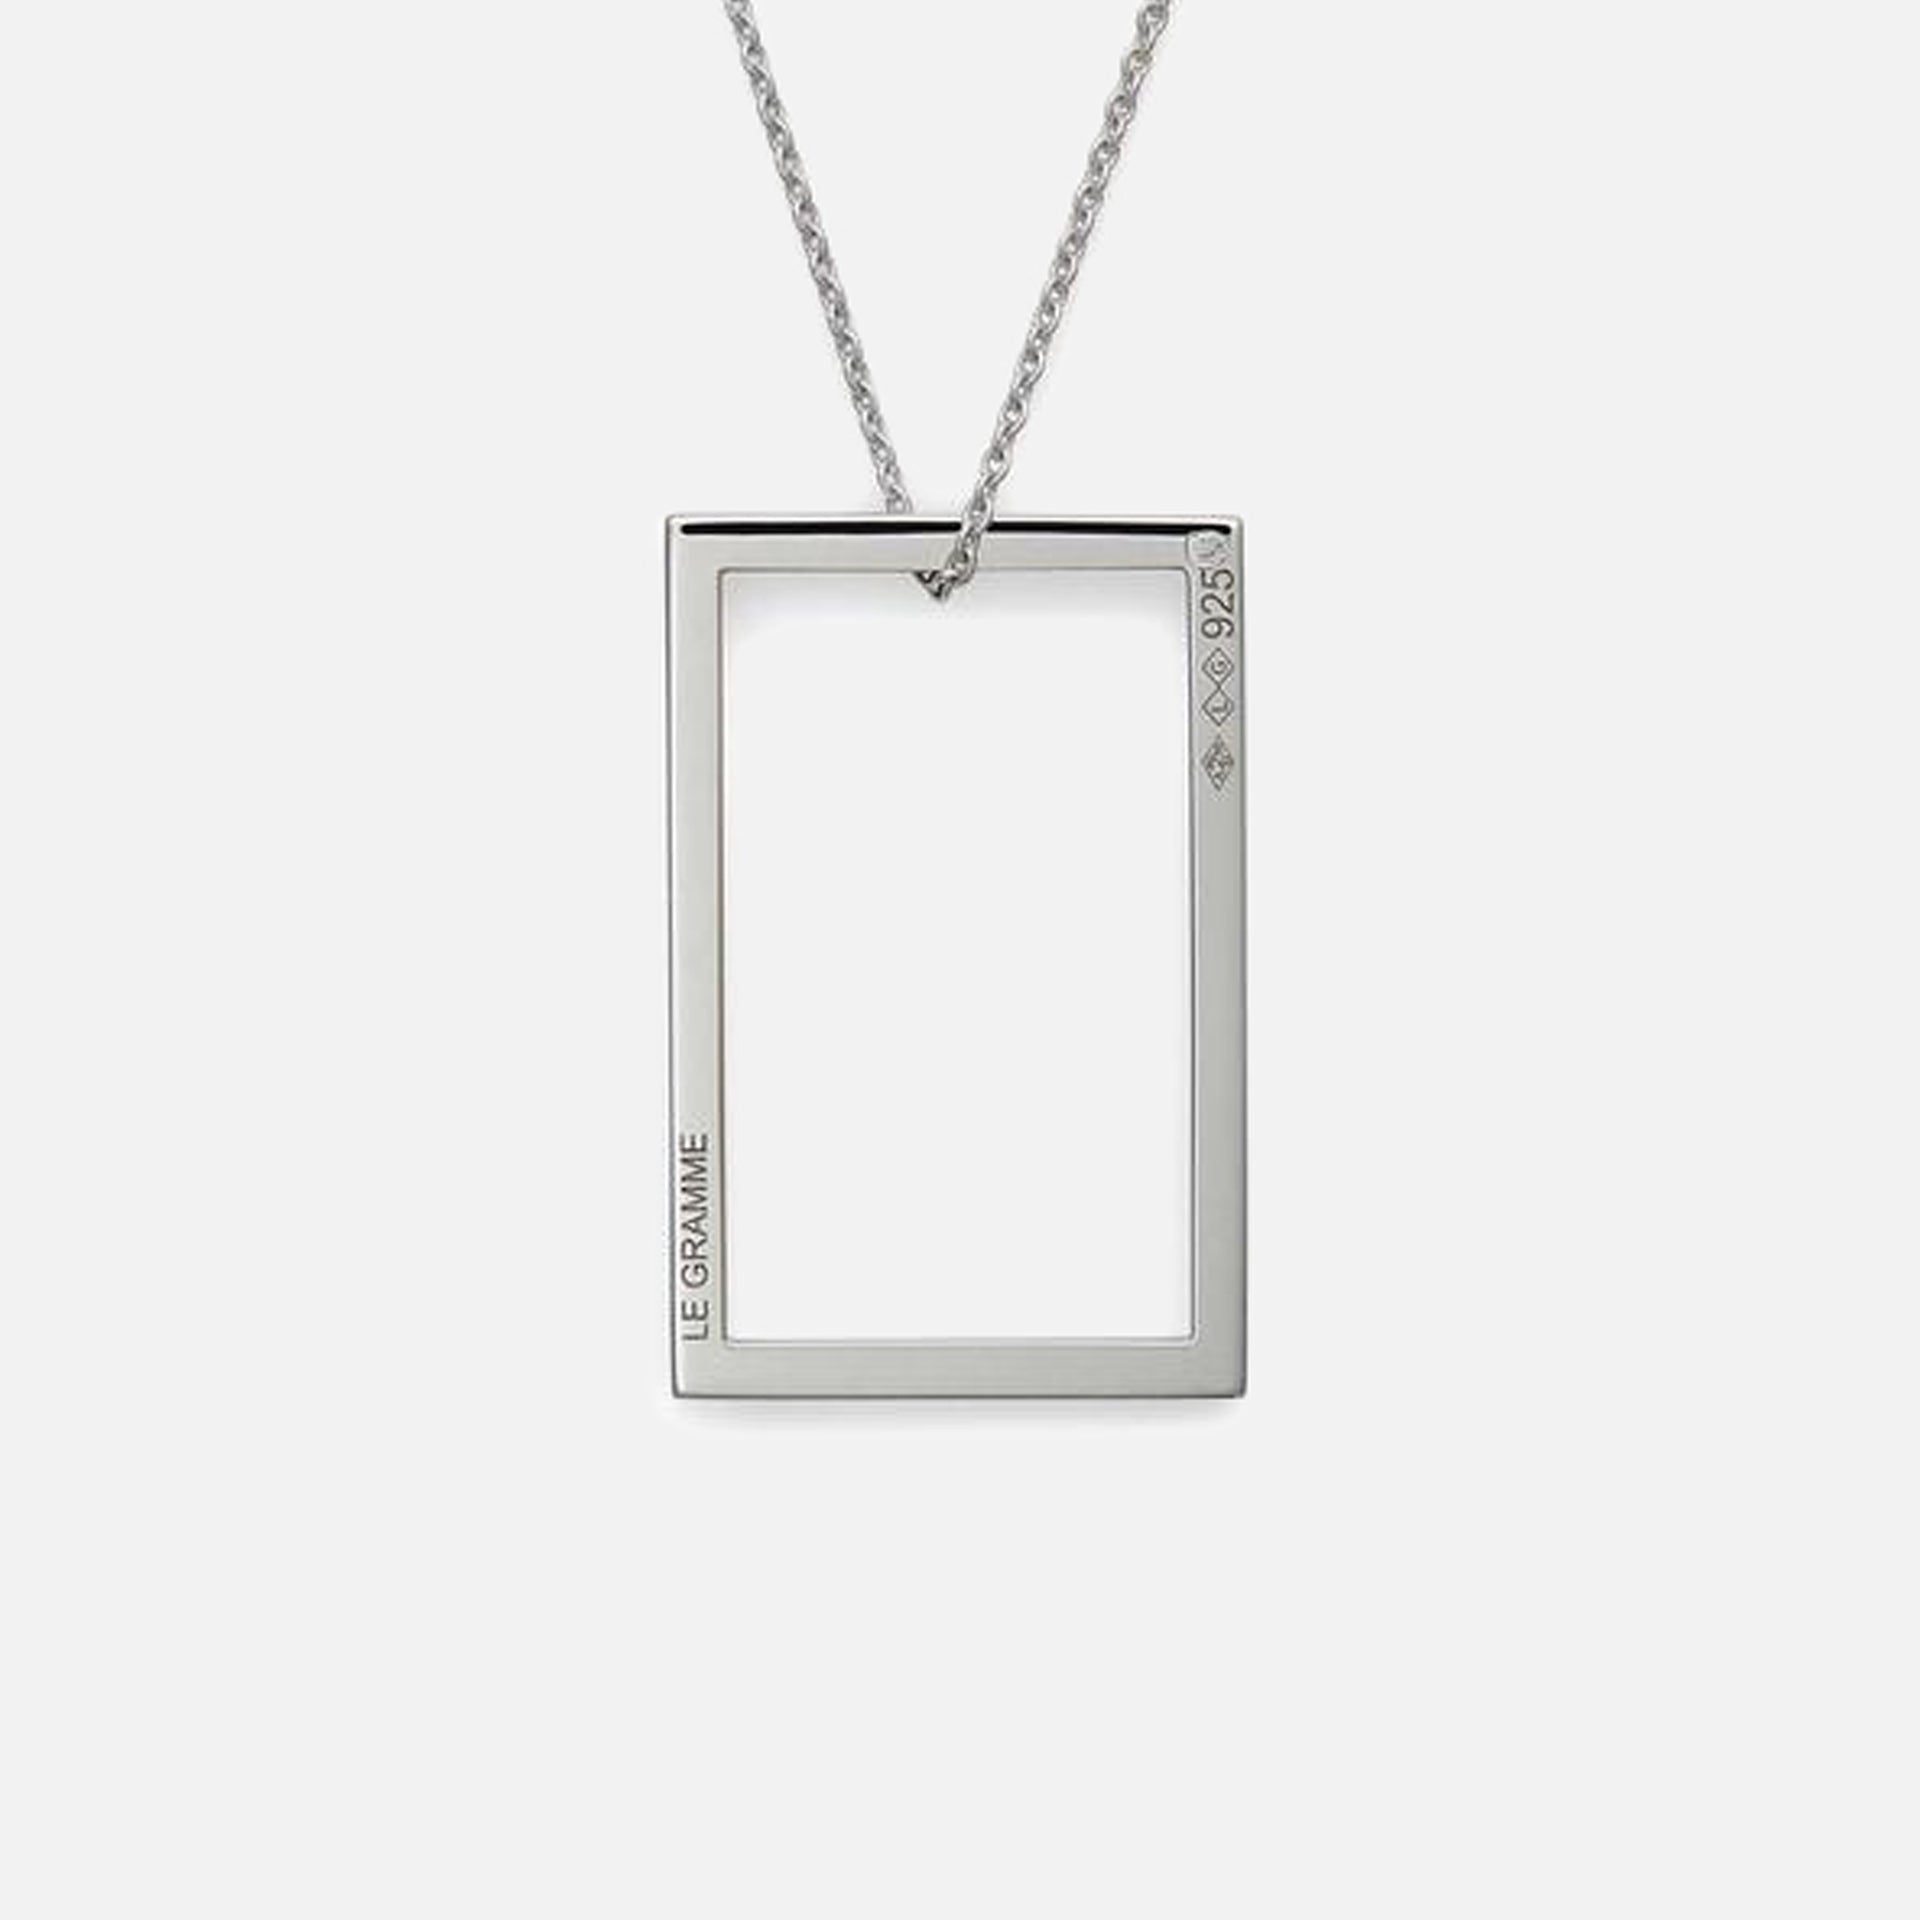 Le Gramme 2.6g Pendant With Chain - Sterling Silver